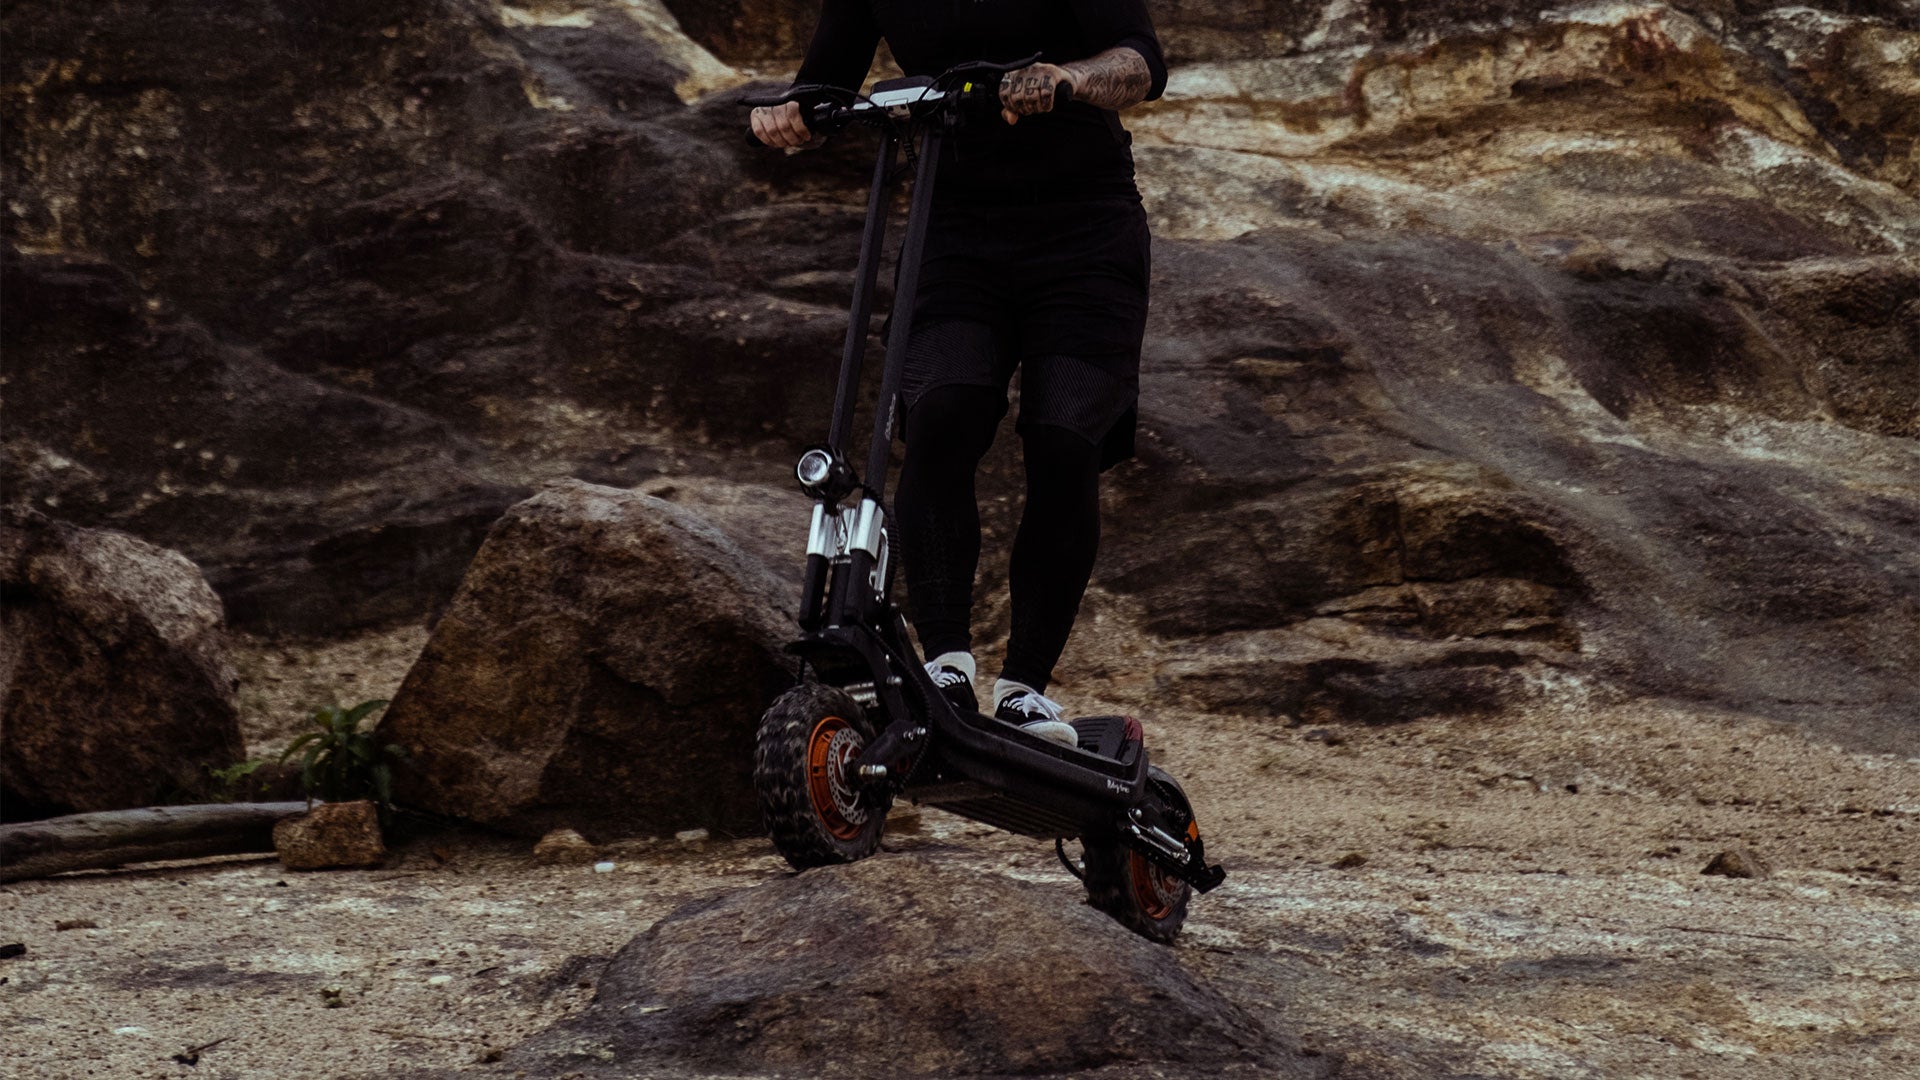 Conquer the wilderness with Urban Drift's top off-road electric scooter